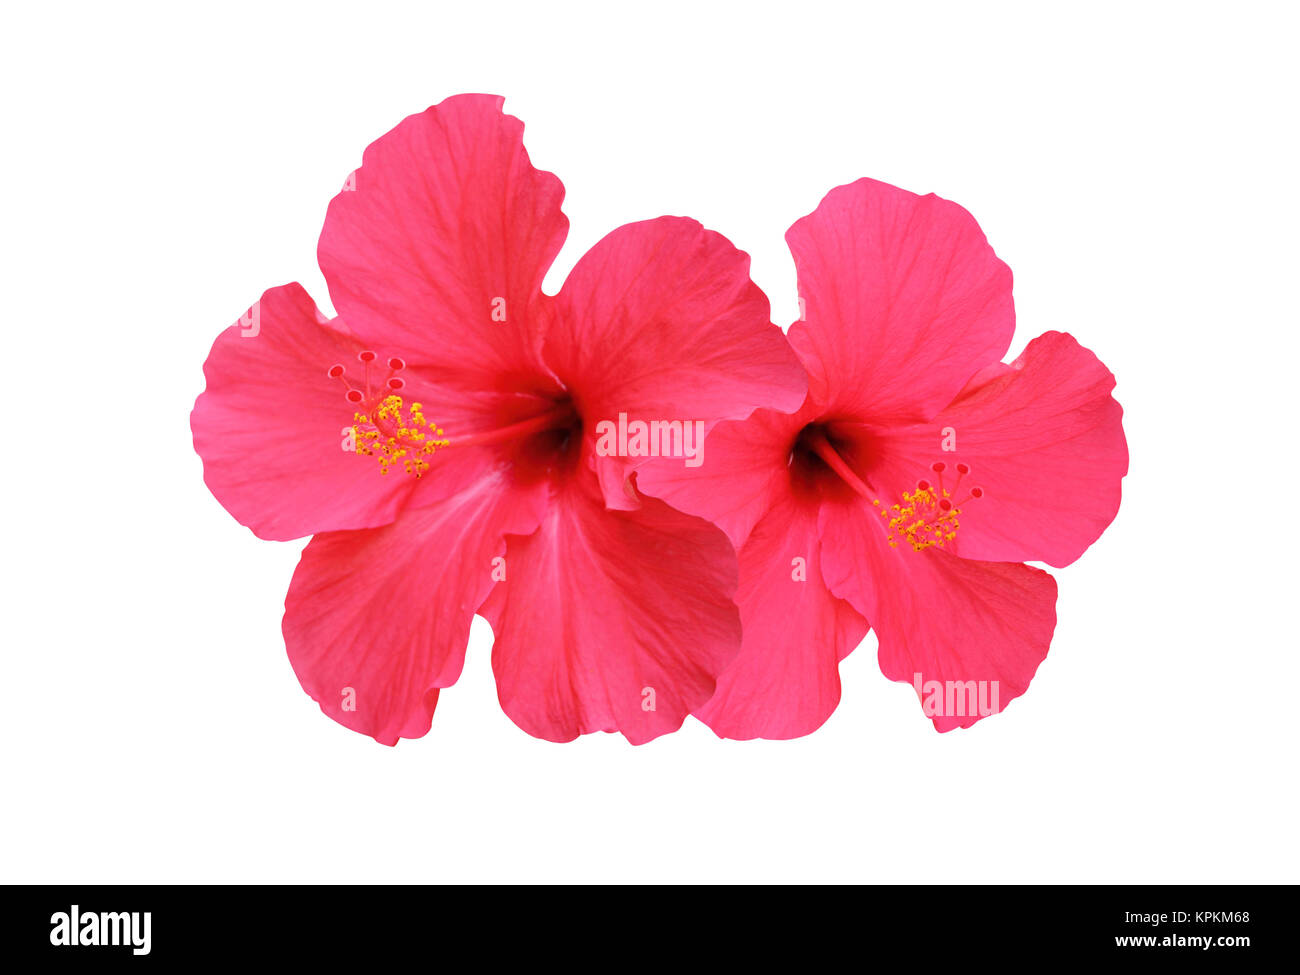 Two hibiscus flowers isolated on white background Stock Photo